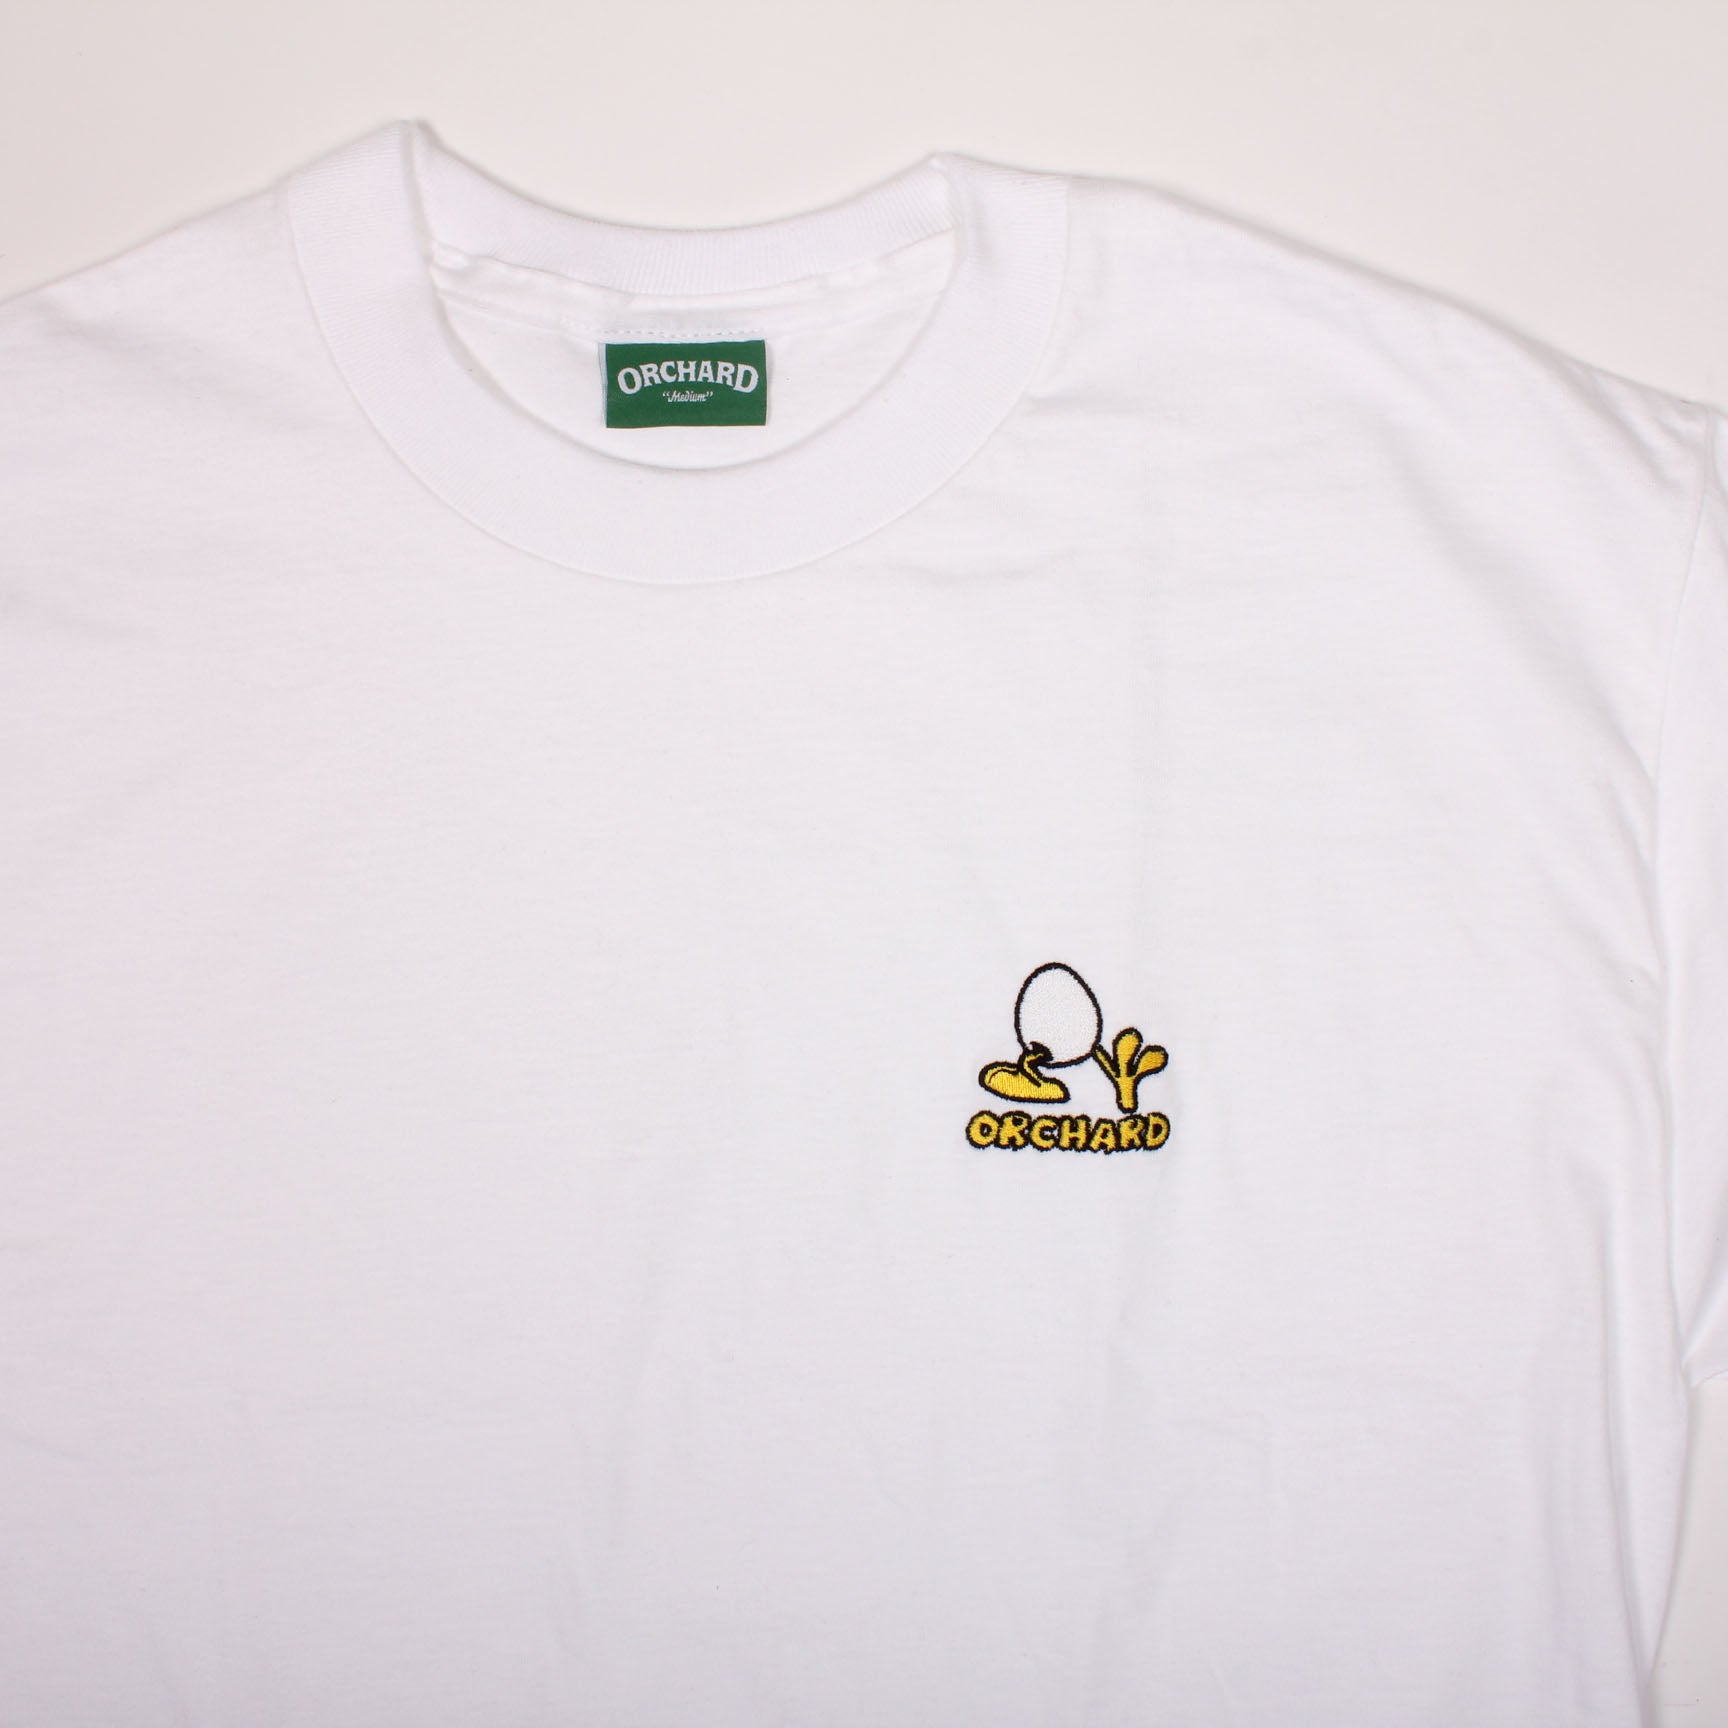 Orchard Shell Shock Tee White